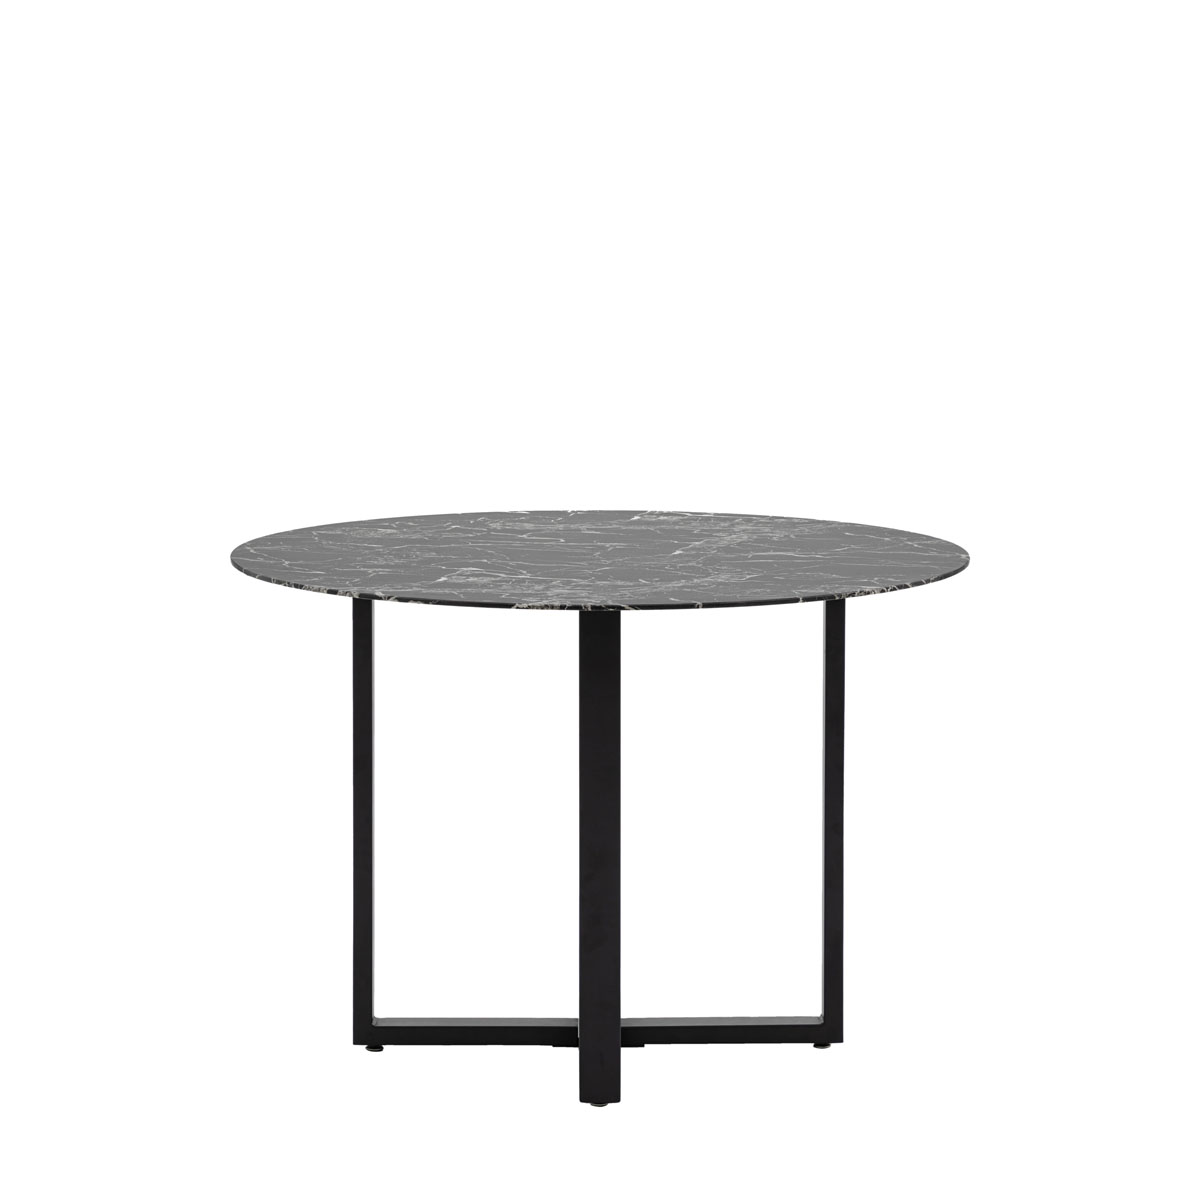 Connolly Dining Table Black Effect 1100x1100x750mm